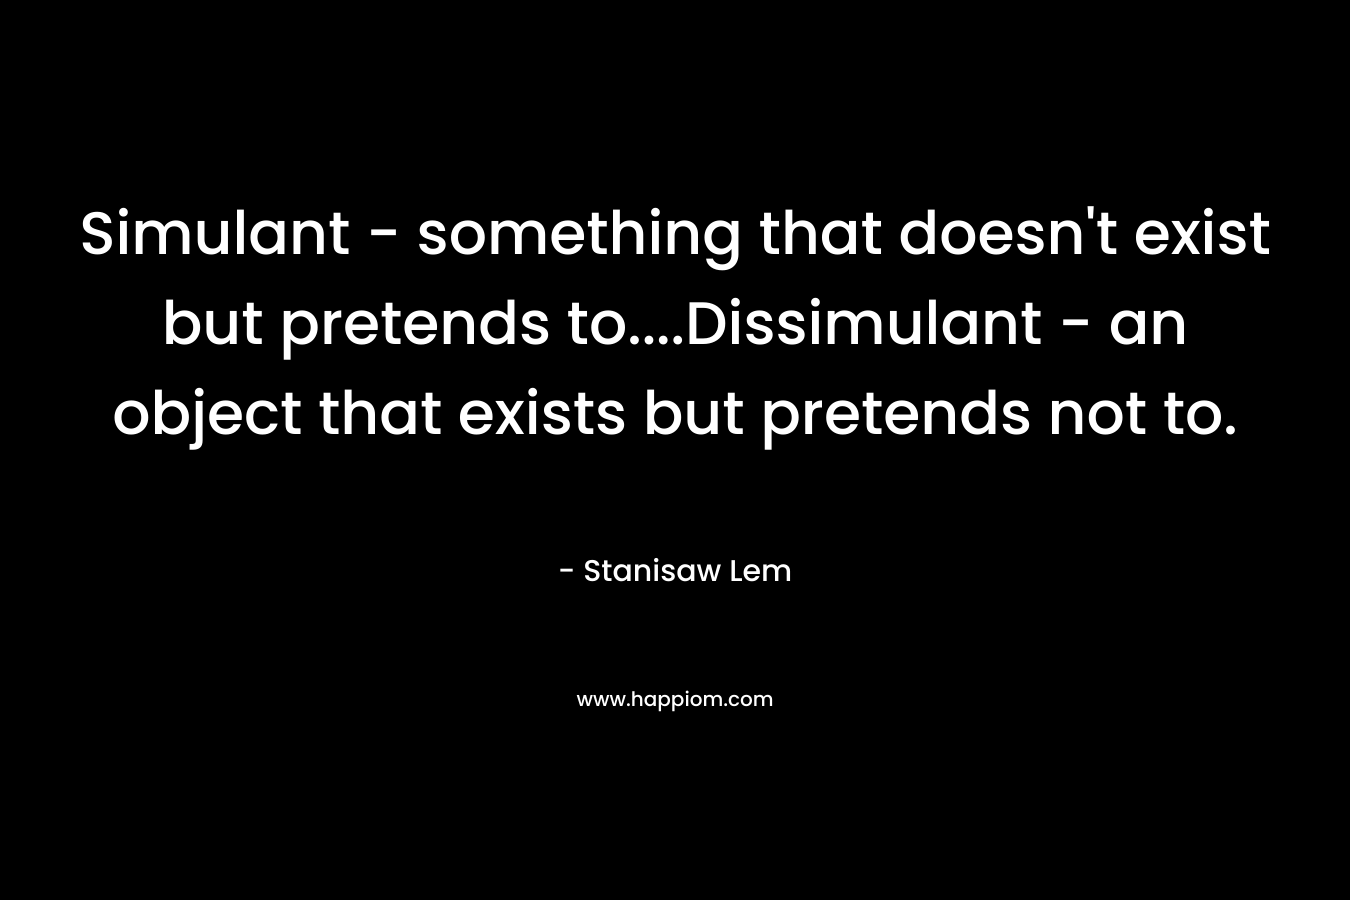 Simulant – something that doesn’t exist but pretends to….Dissimulant – an object that exists but pretends not to. – Stanisaw Lem